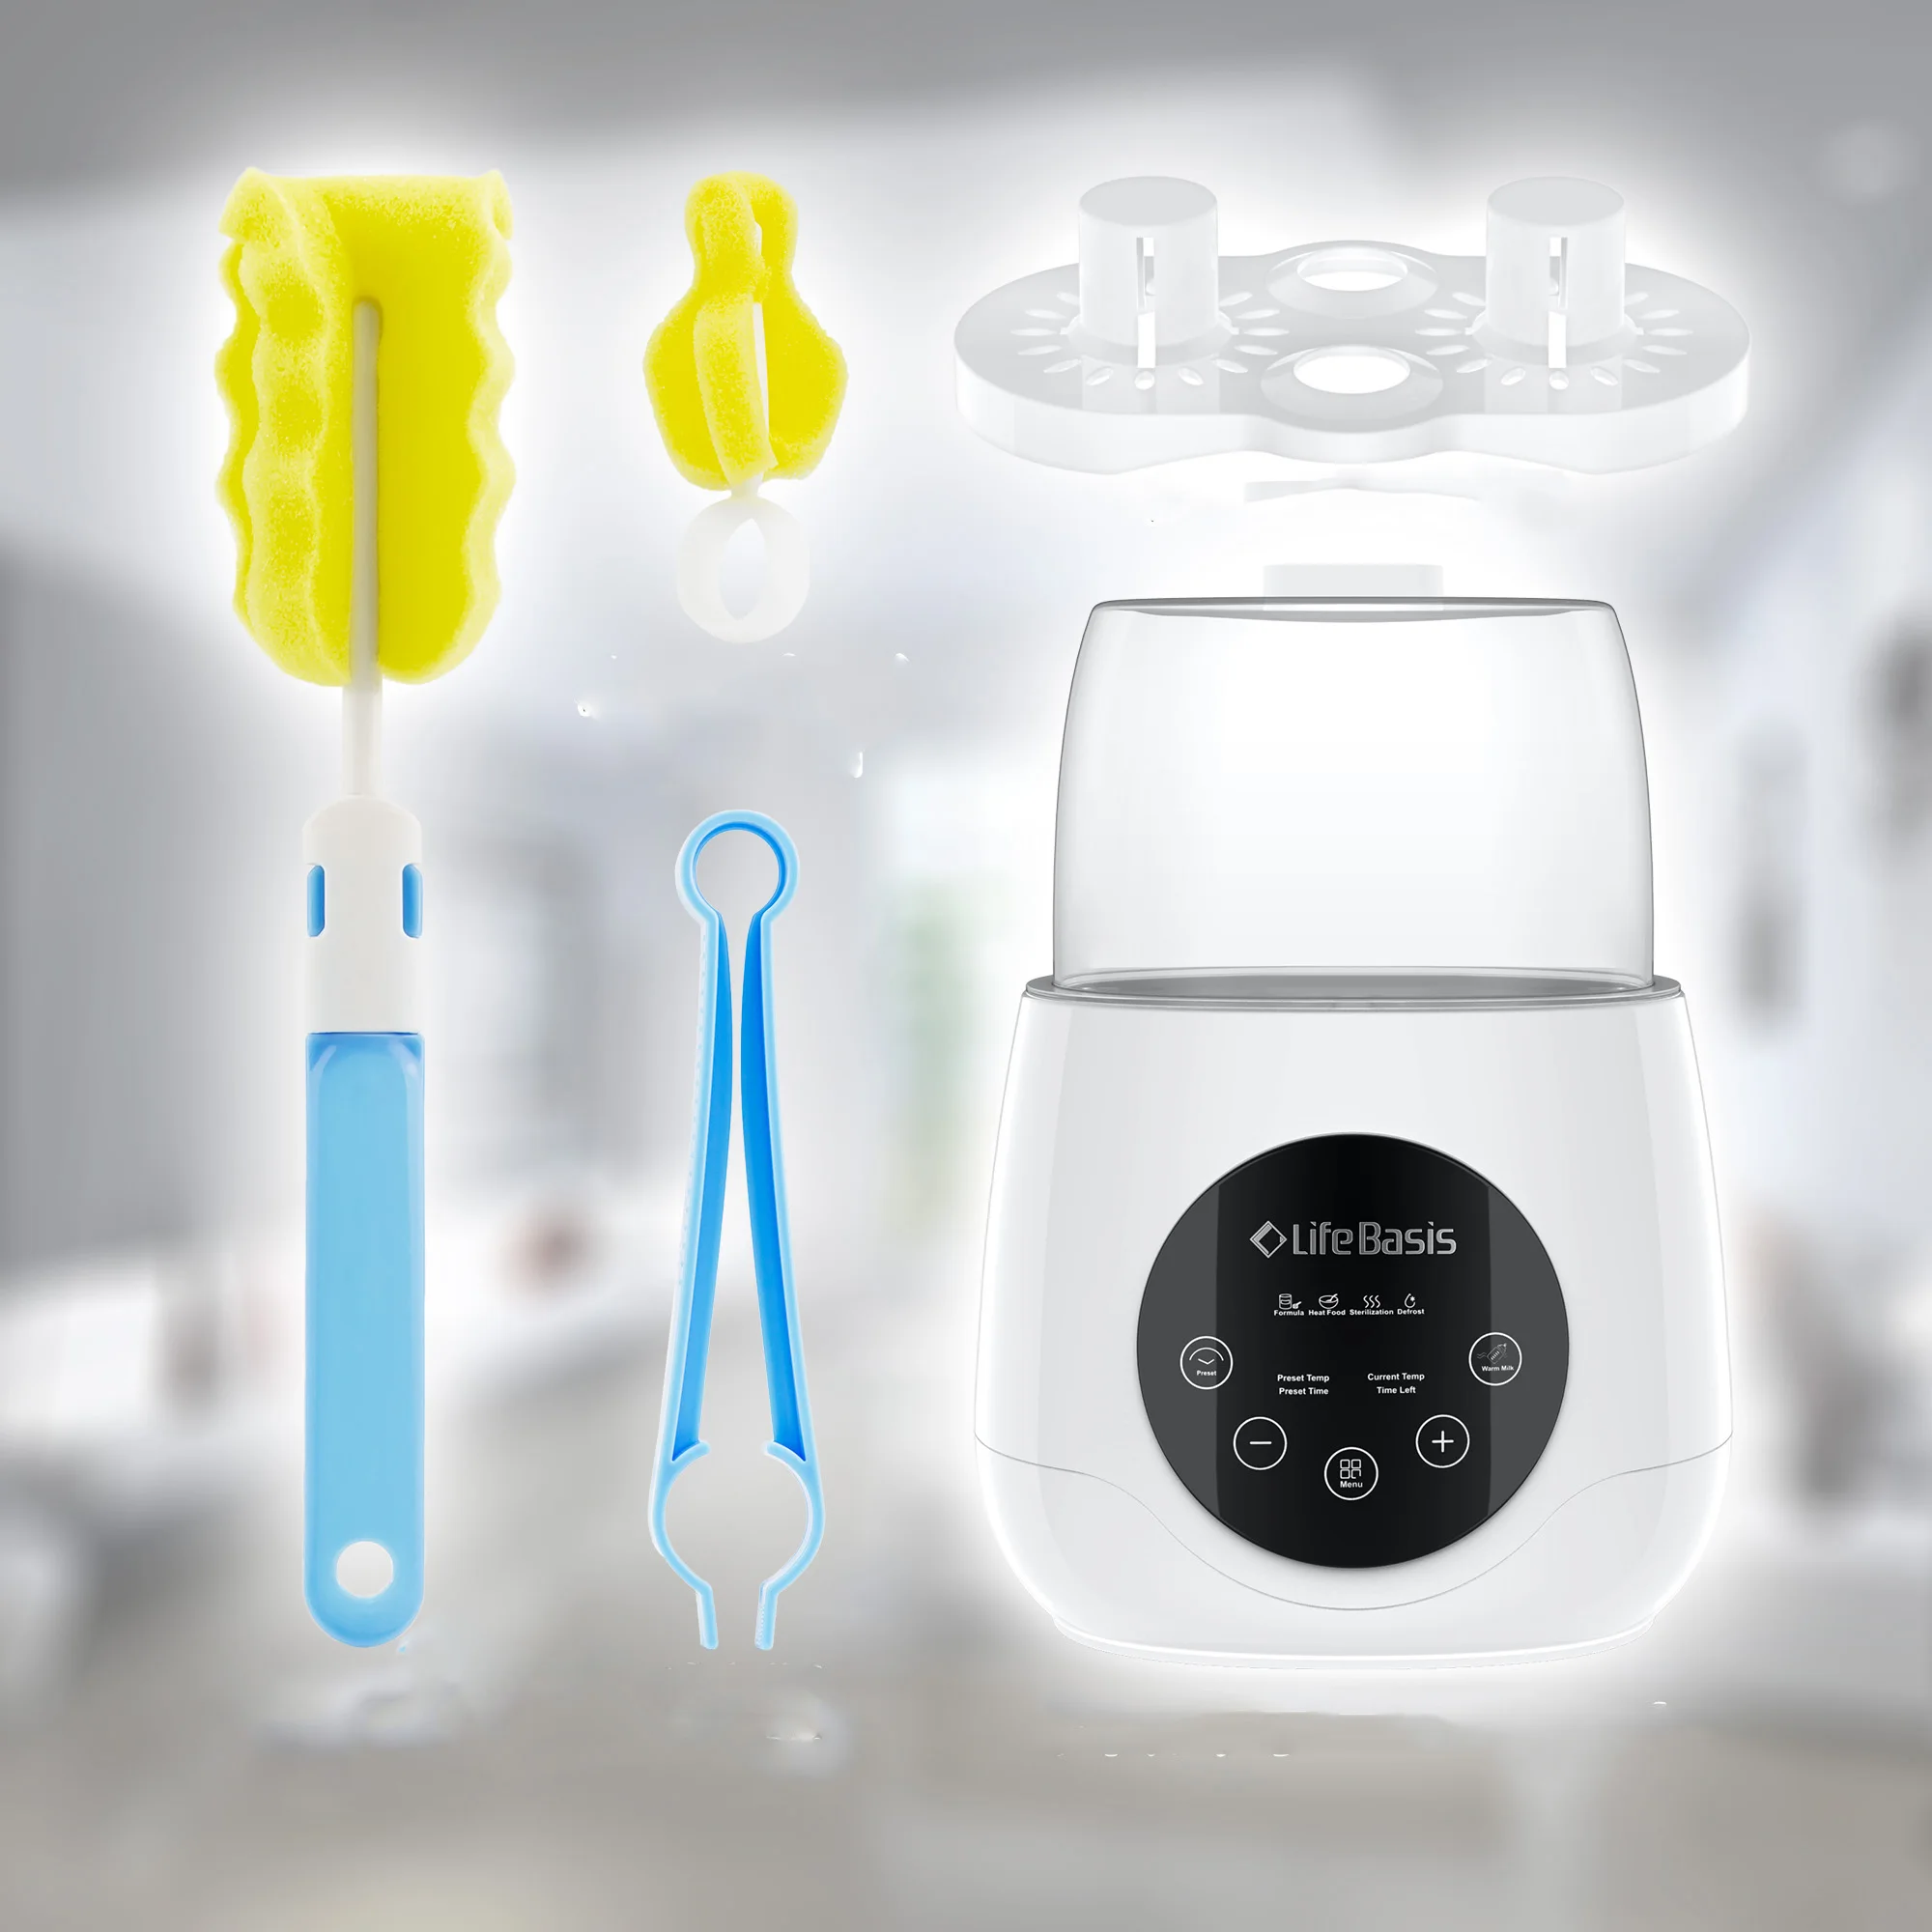 Sterilizers two in one LCD Display Screen Intelligent baby food bottle warmer